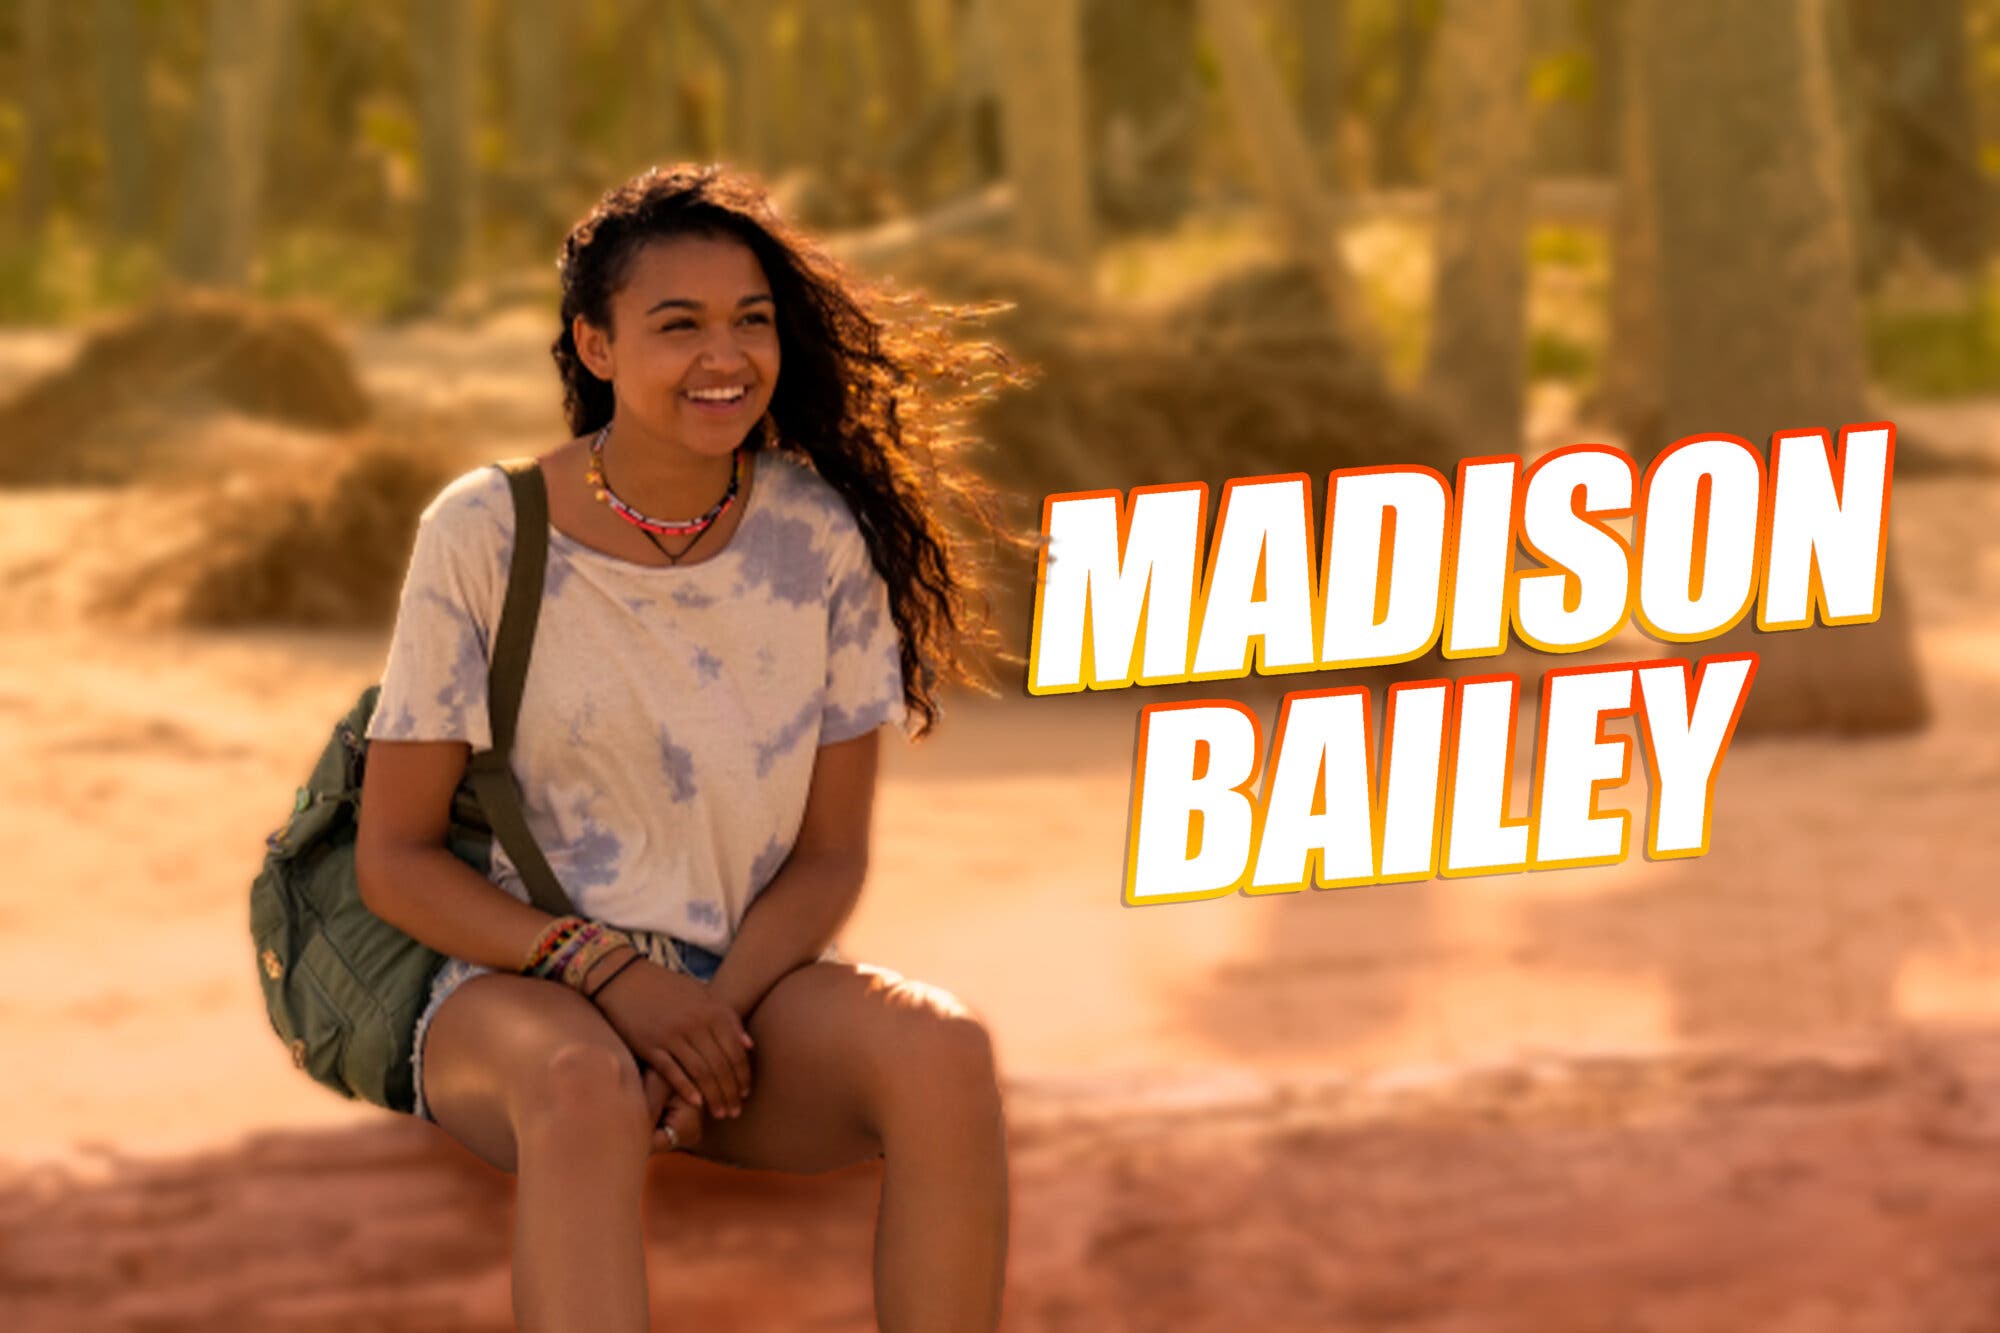 Madison Bailey, the actress who sweeps in and out of the Outer Banks